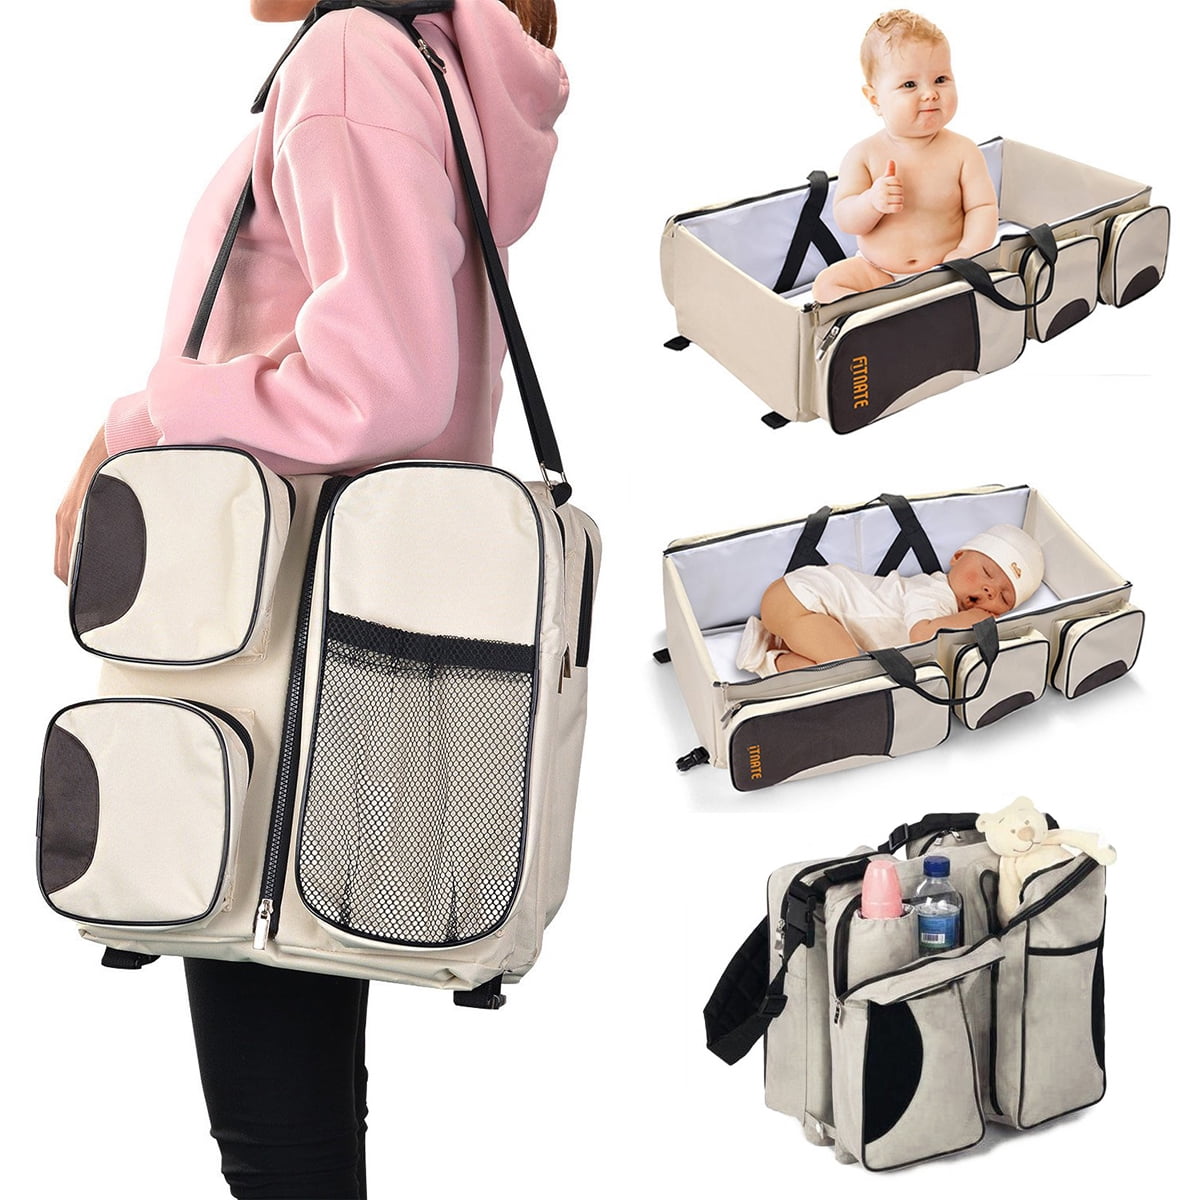 3-1 Travel Bassinet Portable Crib Diaper Bag Backpack Foldable Baby Bed Diaper Changing Station Multi-Function Large-Capacity Mommy Bag with Mattress for Newborn Baby Toddler Grey 